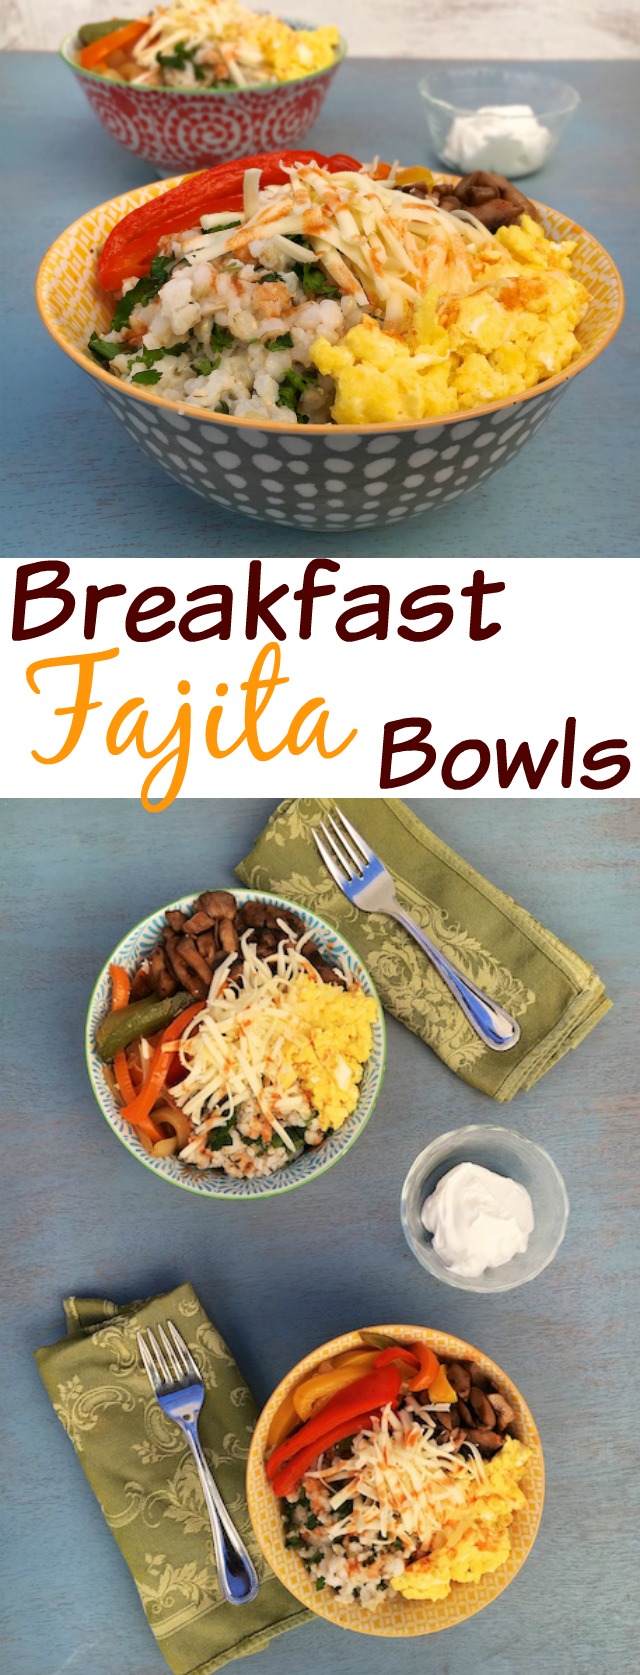 Wake up your morning routine with a protein-packed Breakfast Fajita Bowl featuring Real California milk products #sponsored @tspbasil